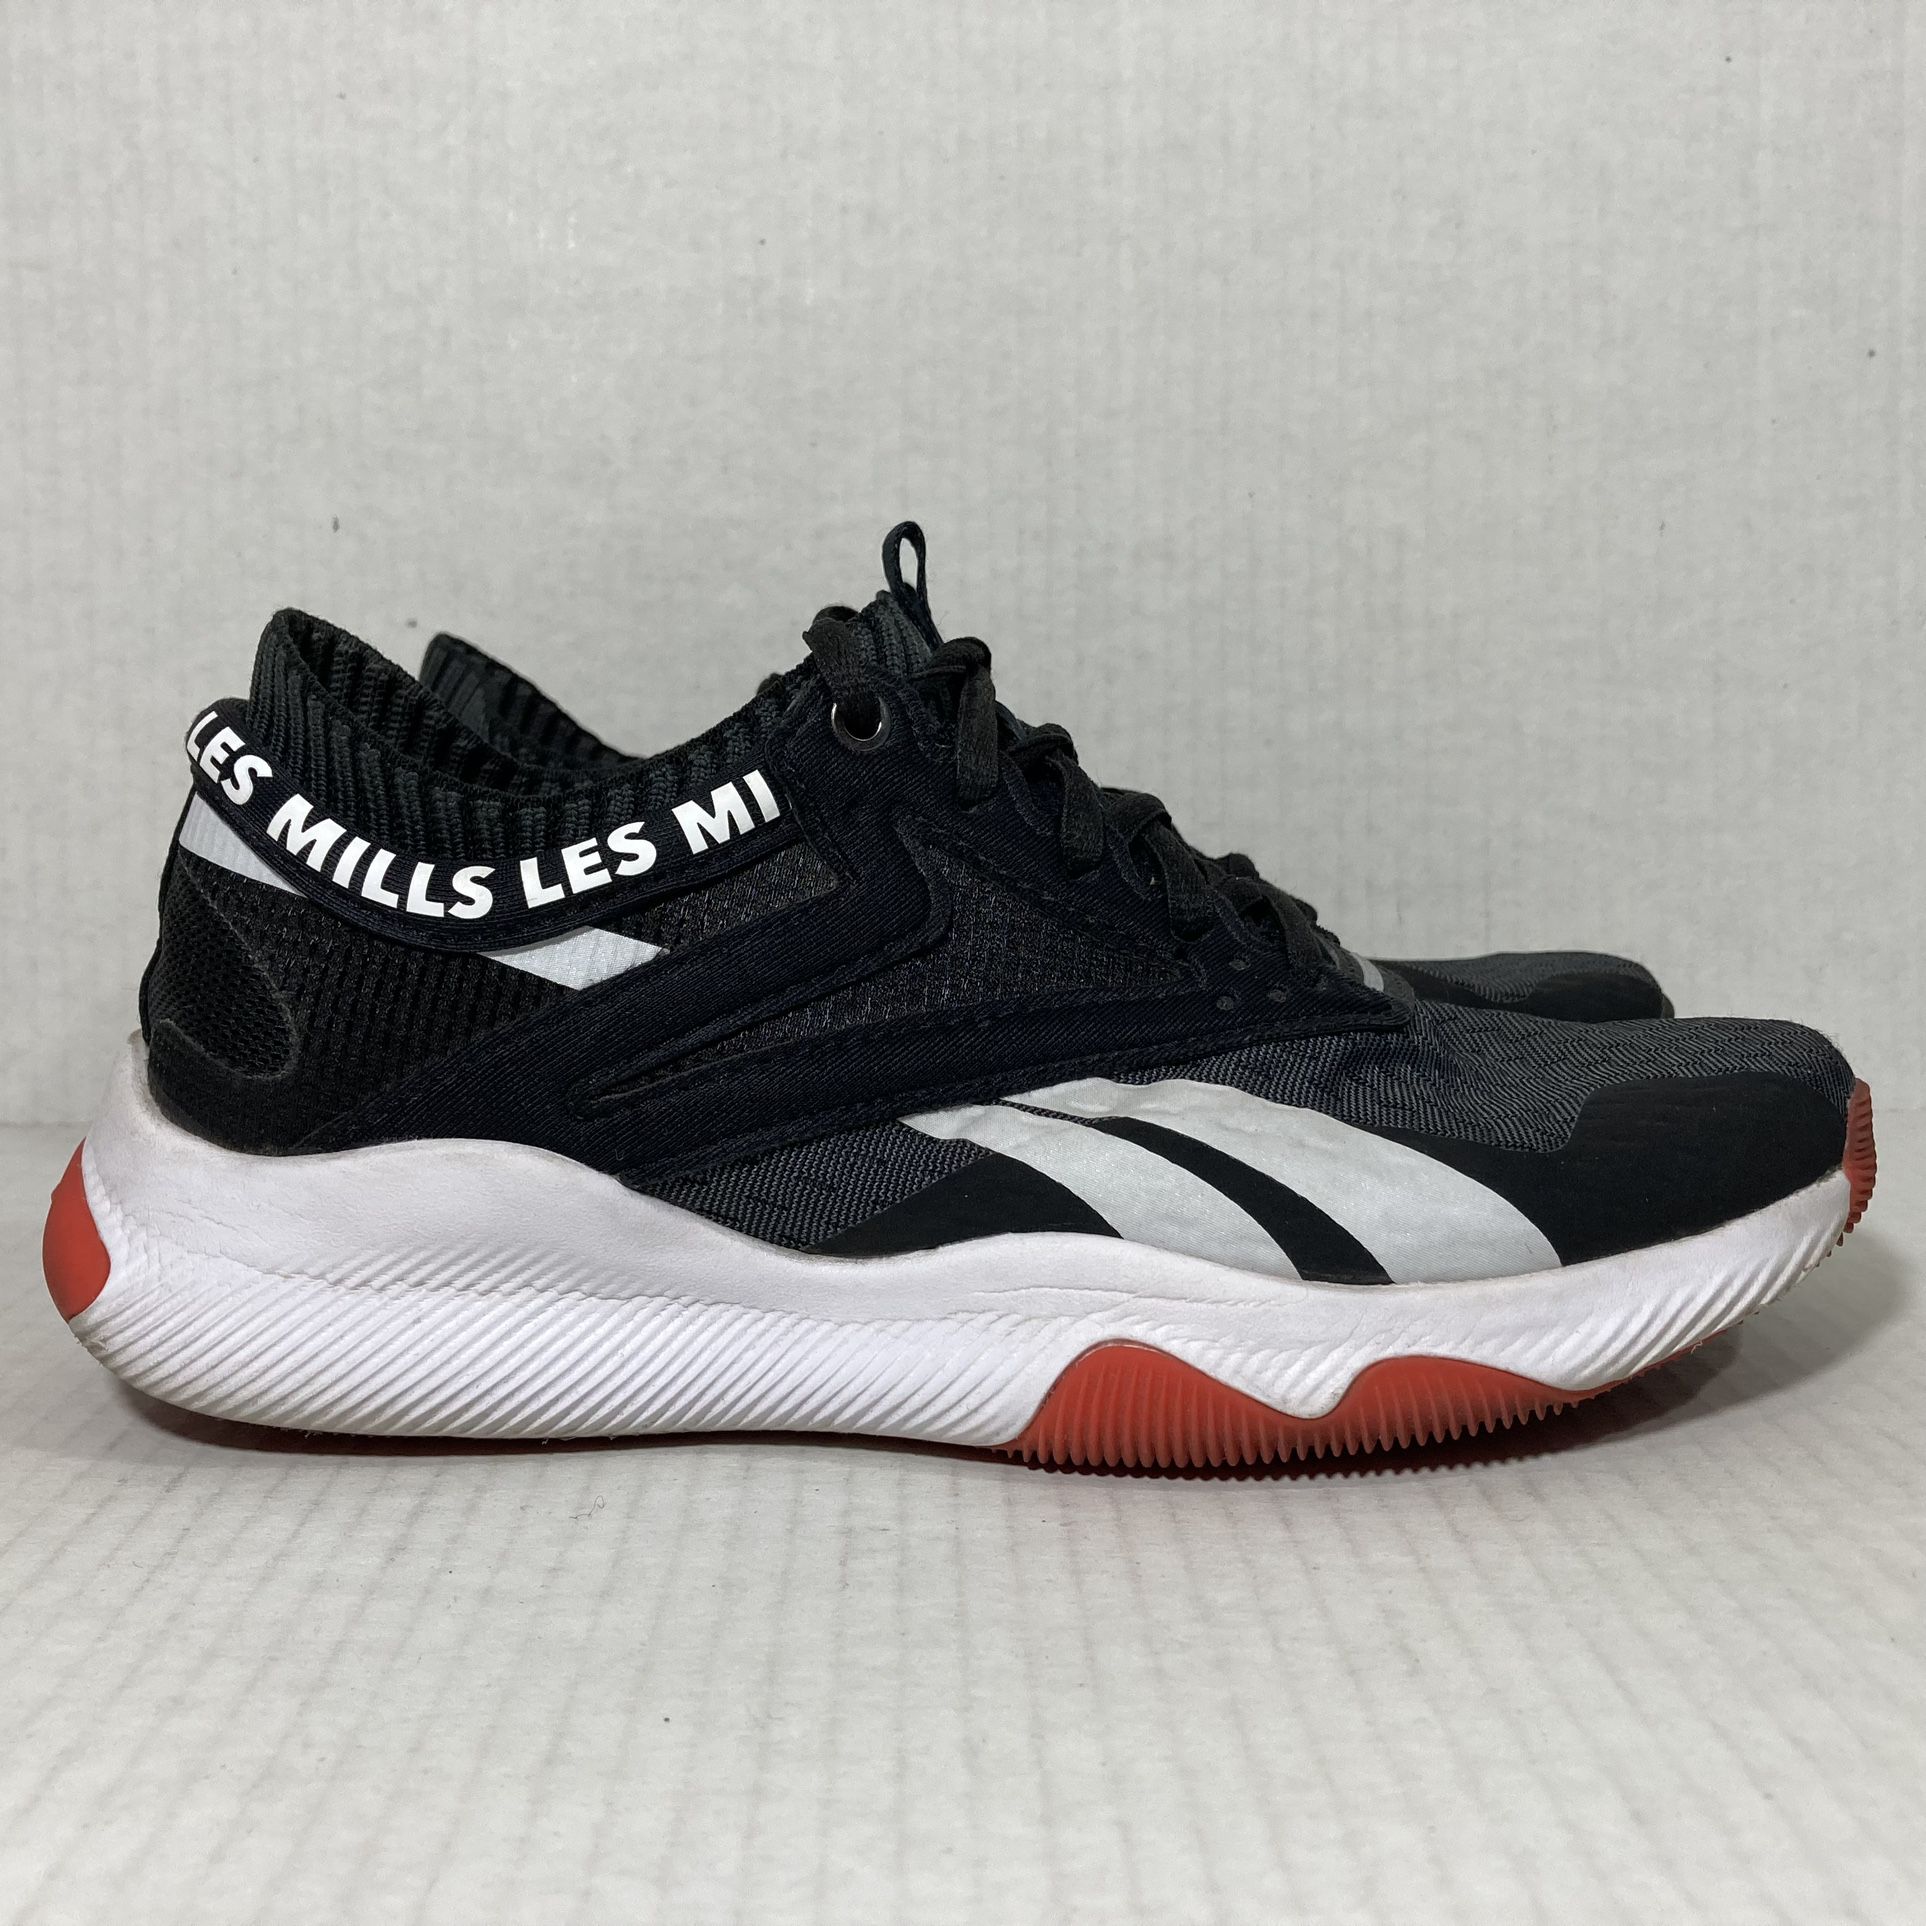 Reebok HIIT Les Mills Casual Fitness Performance Running Training Shoes Wmns Sz 7 for Sale in Tempe, AZ - OfferUp